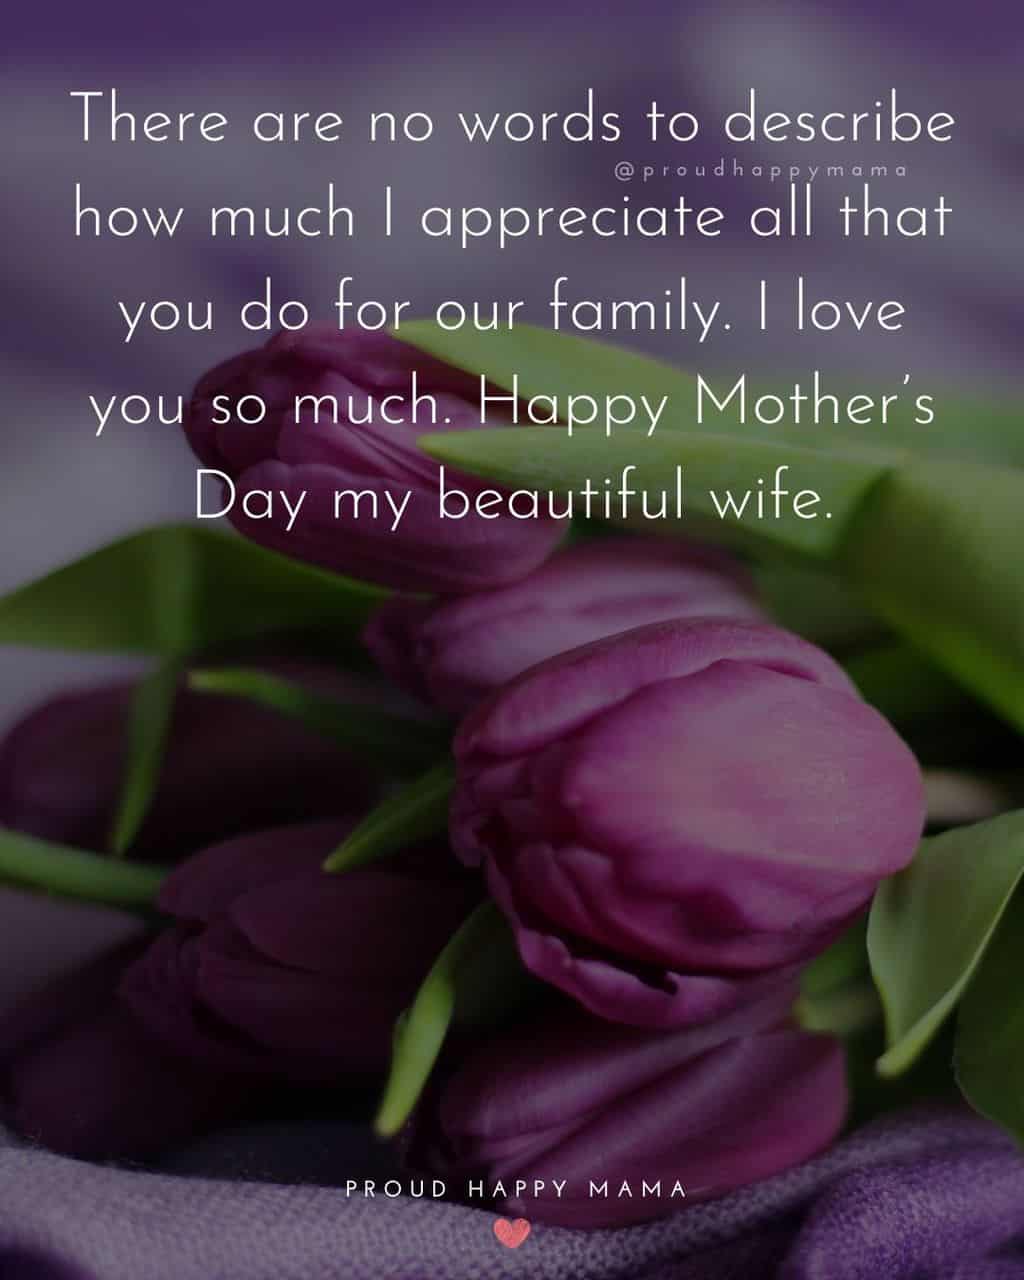 Happy Mothers Day Quotes For Wife - There are no words to describe how much I appreciate all that you do for our family. I